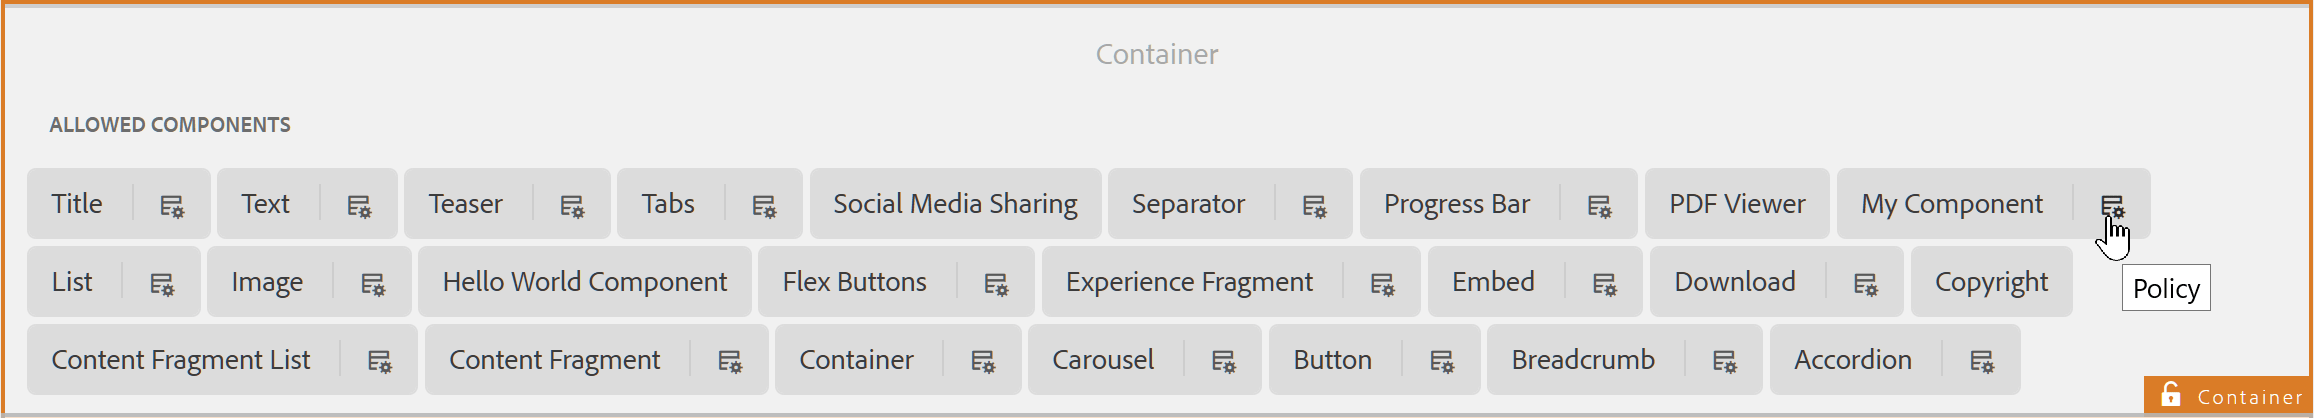 allowed components shown as buttons in the content page template container